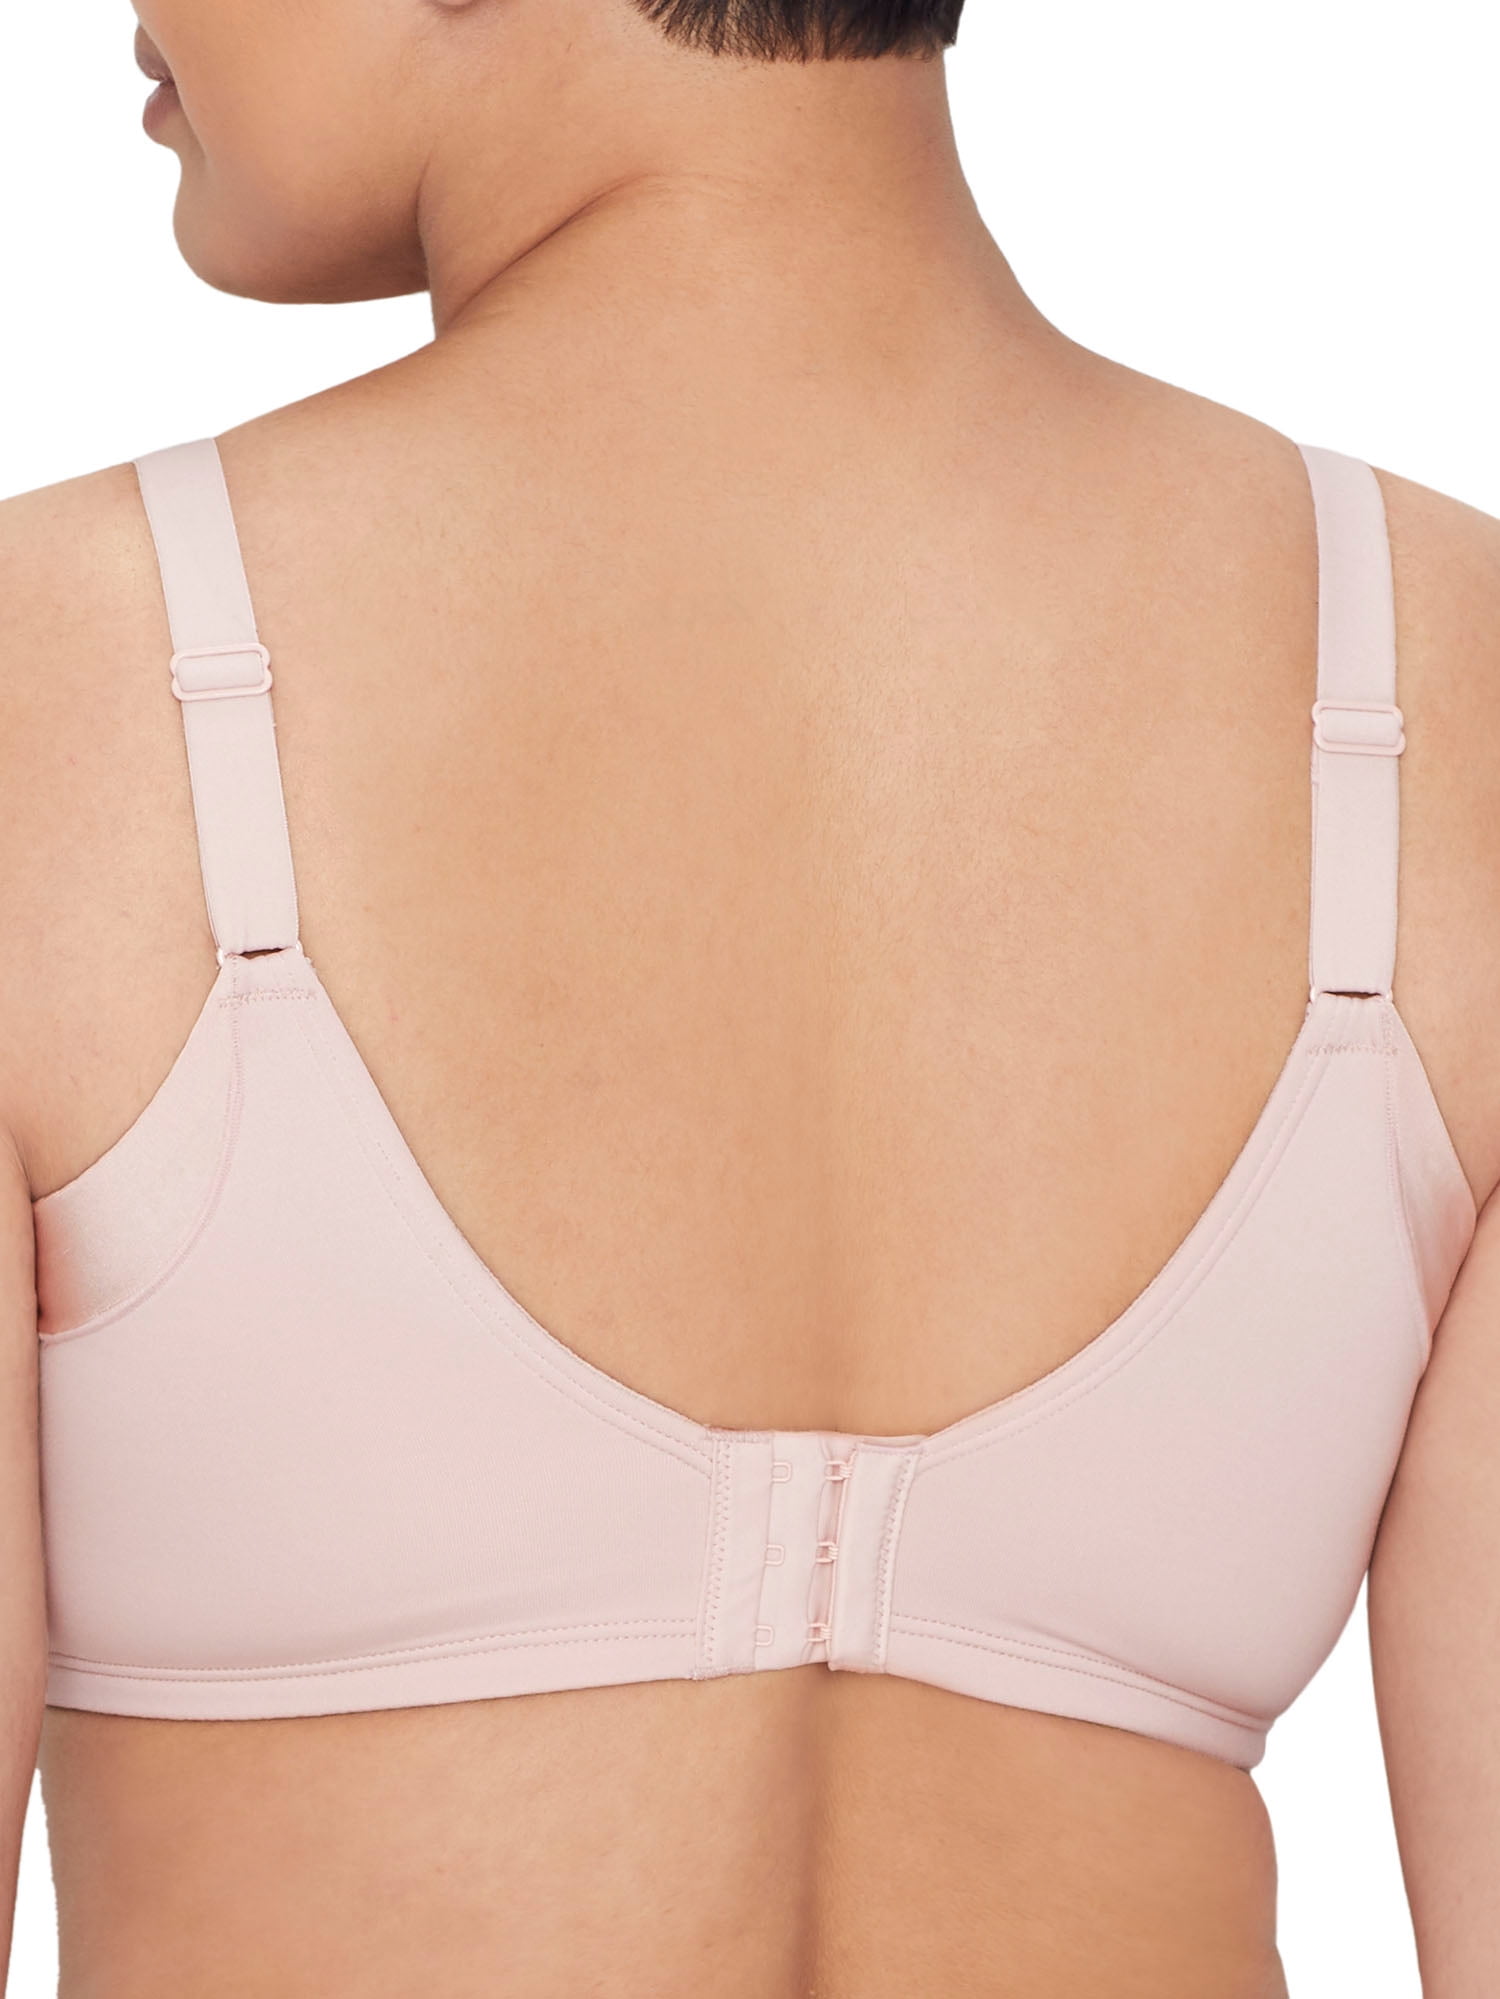 Beauty Back Underarm Back Smoother T-Shirt Bra 